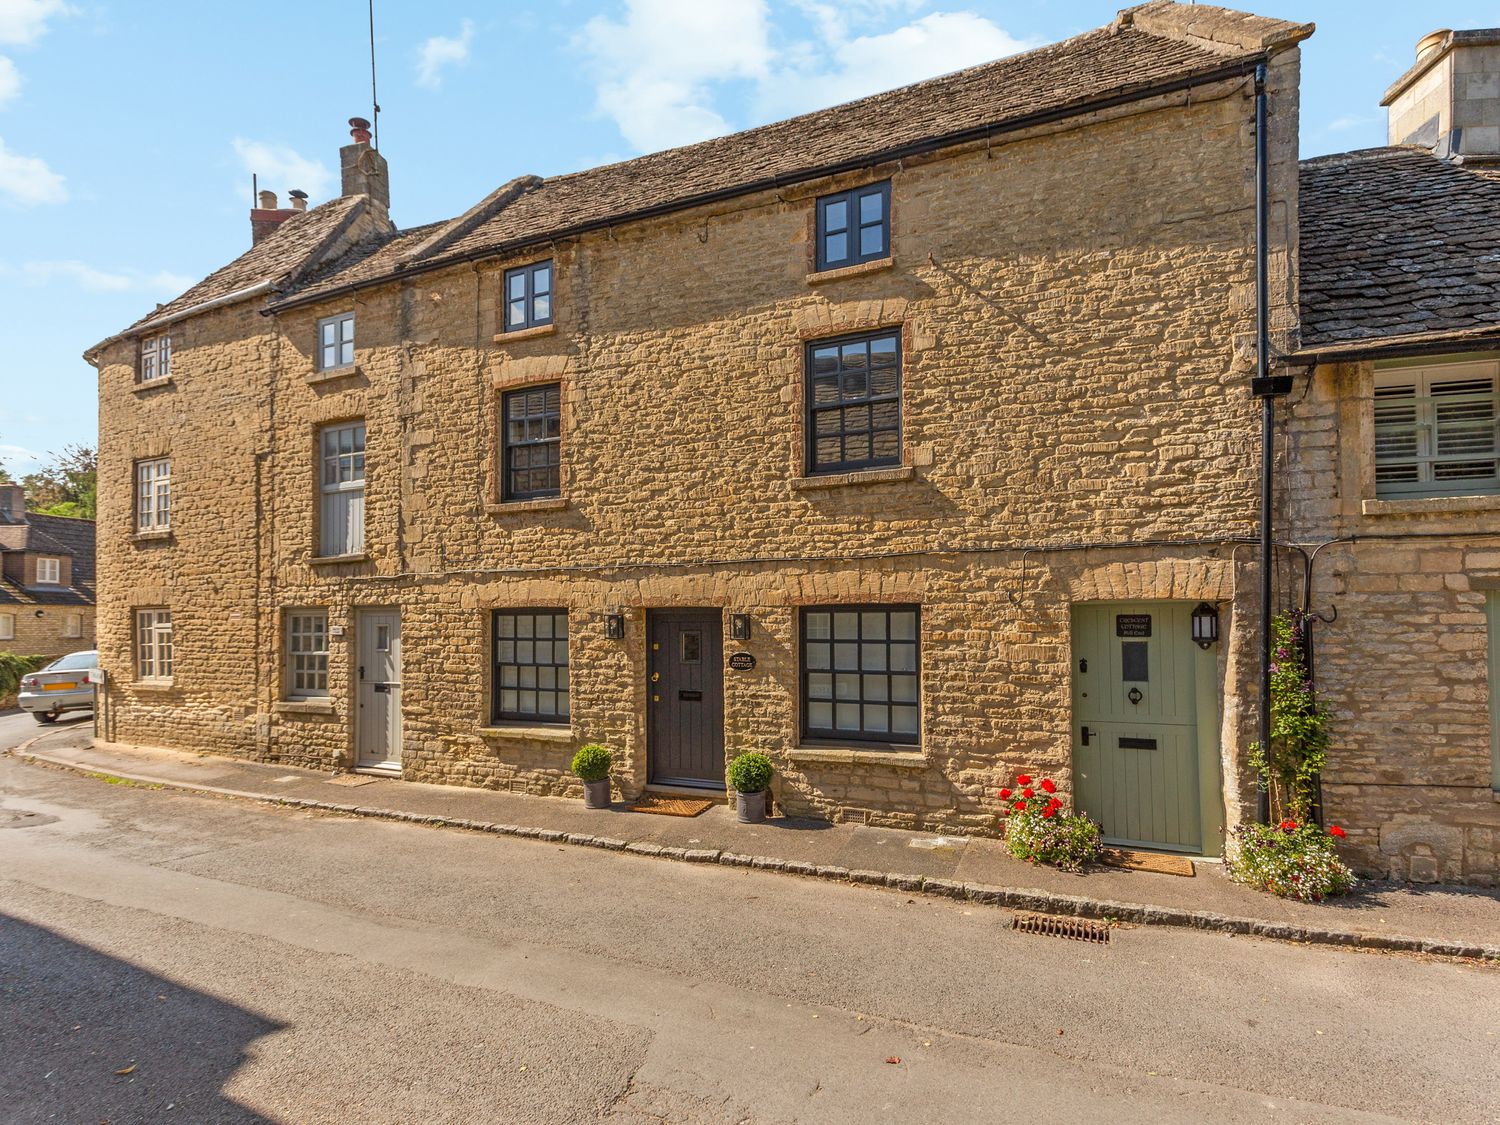 Stable Cottage - Cotswolds - 1088889 - photo 1